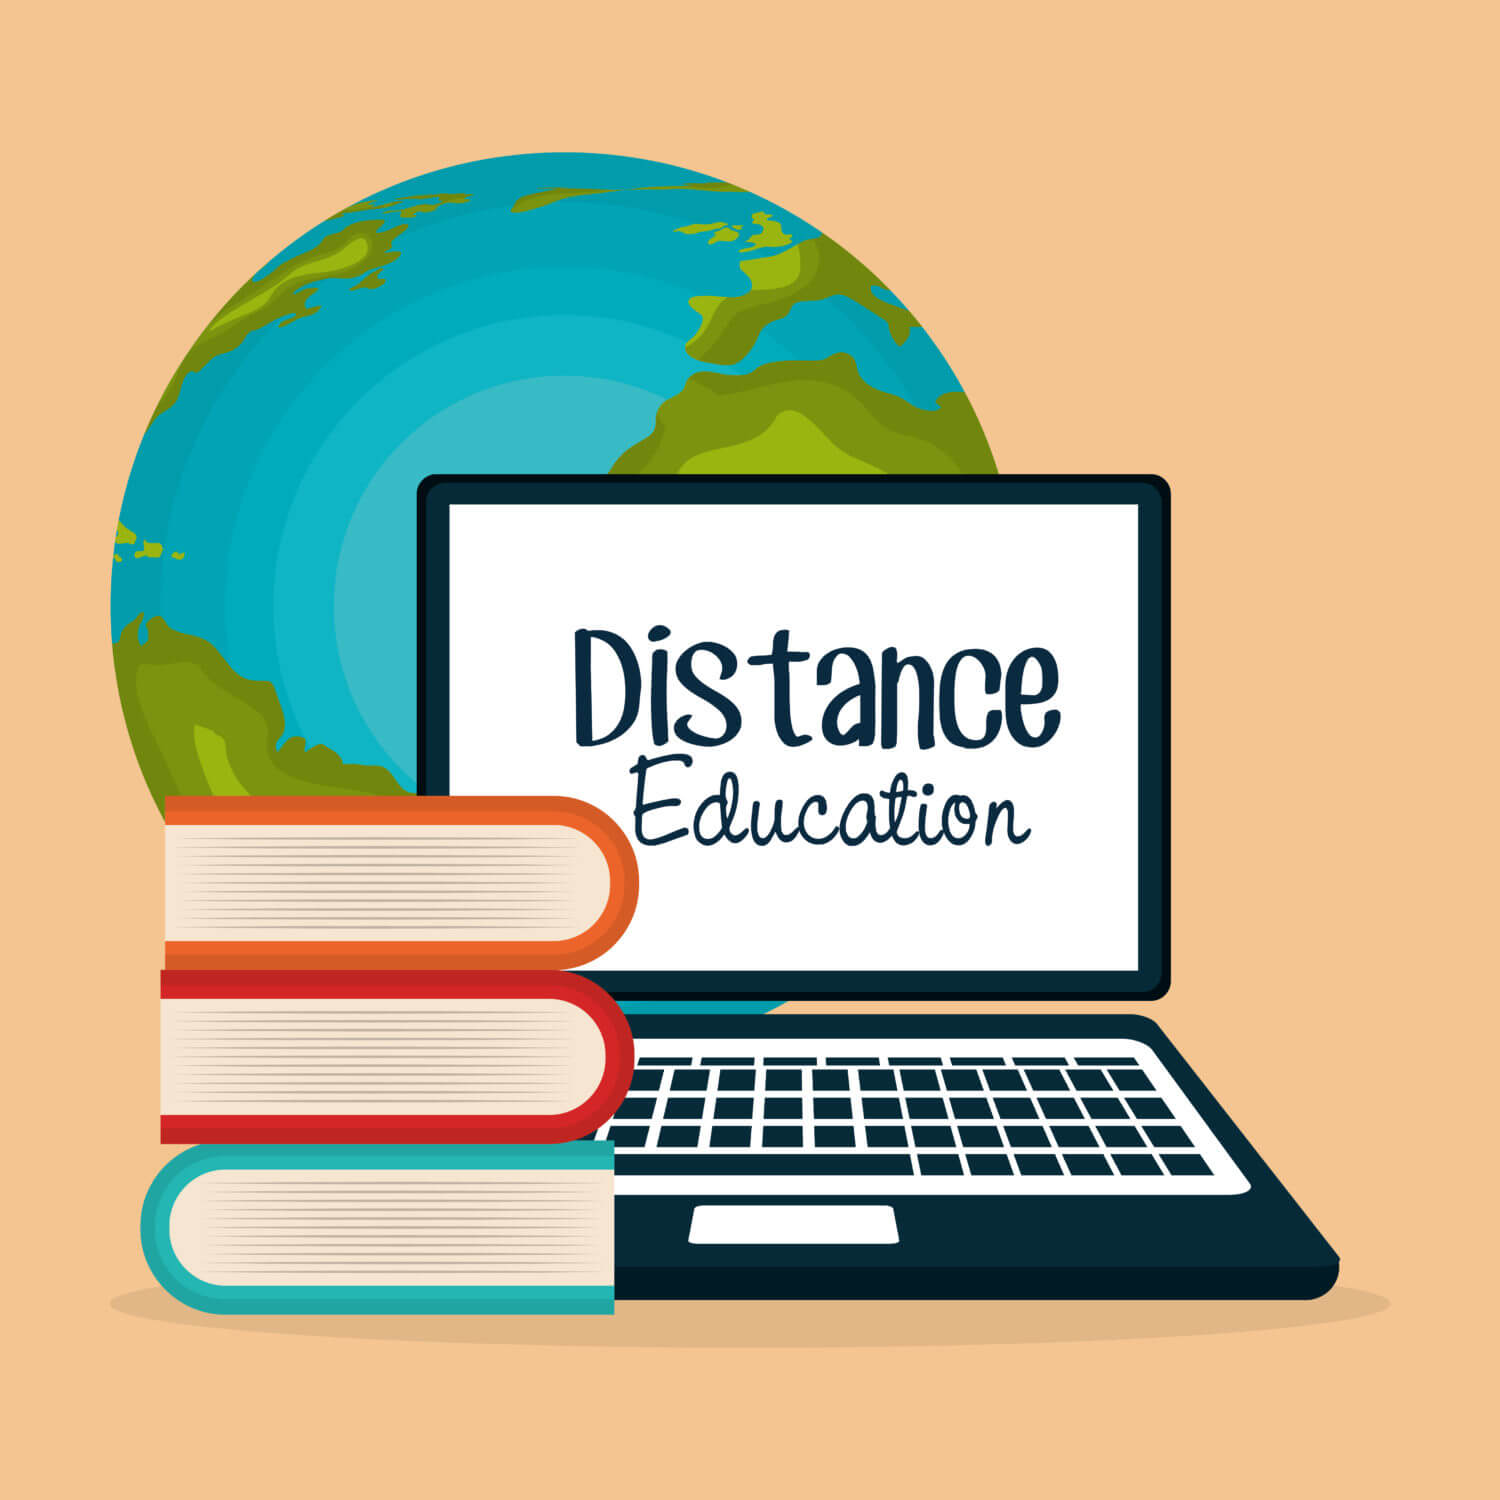 distance education courses are available